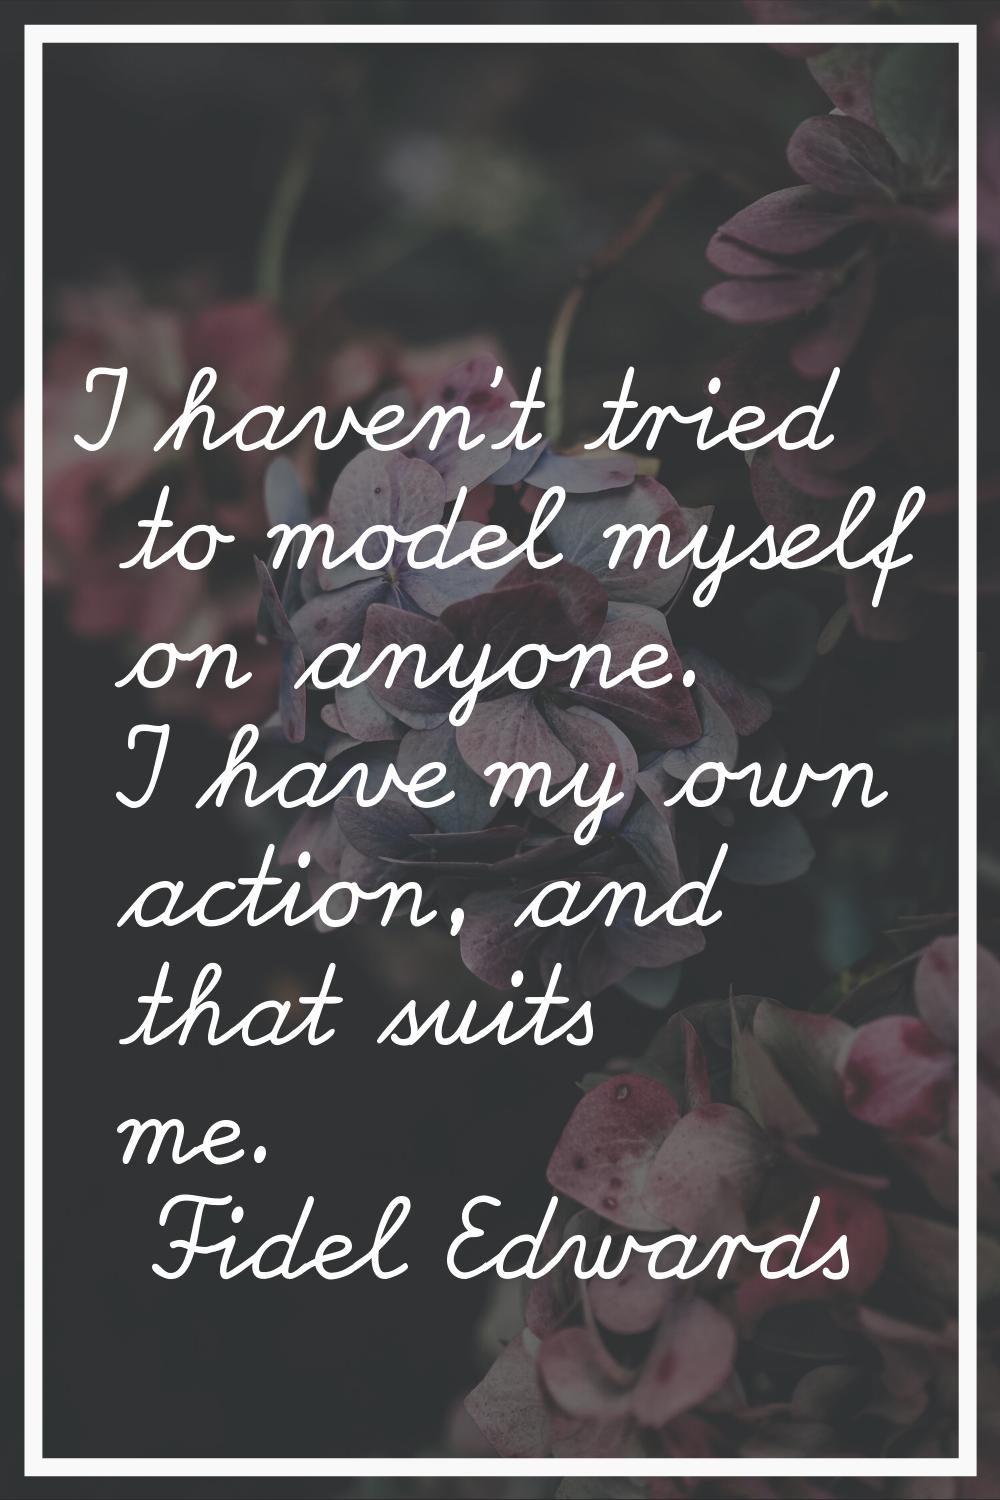 I haven't tried to model myself on anyone. I have my own action, and that suits me.